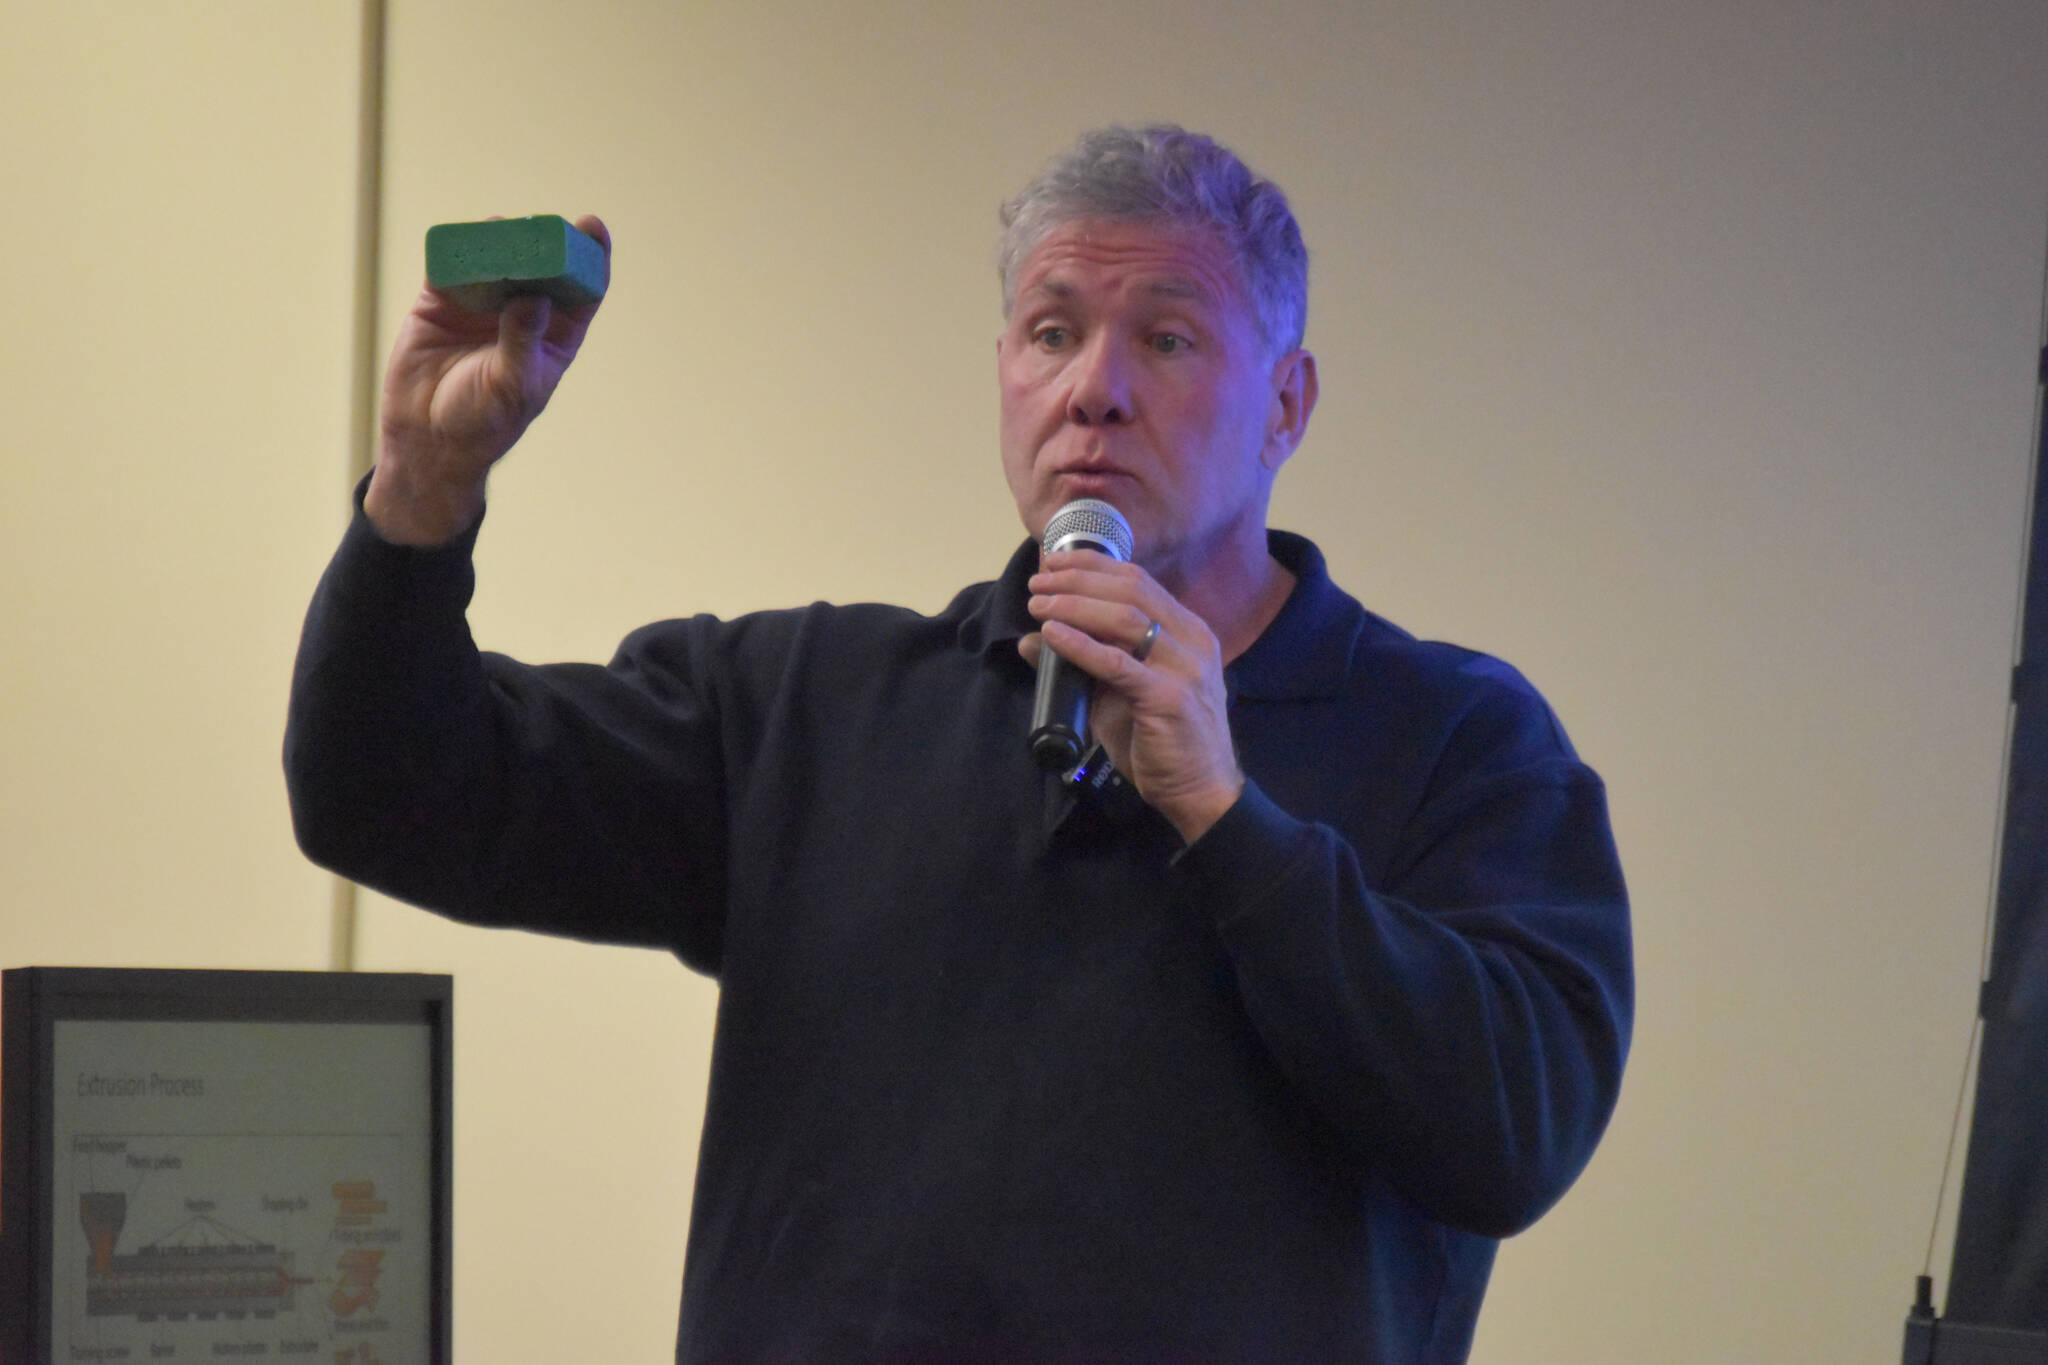 Patrick Simpson speaks about his recycled plastic lumber project while holding a sample of the finished product at a Kenai Peninsula College Showcase on Thursday, Oct. 27, 2022 in Soldotna, Alaska. (Jake Dye/Peninsula Clarion)